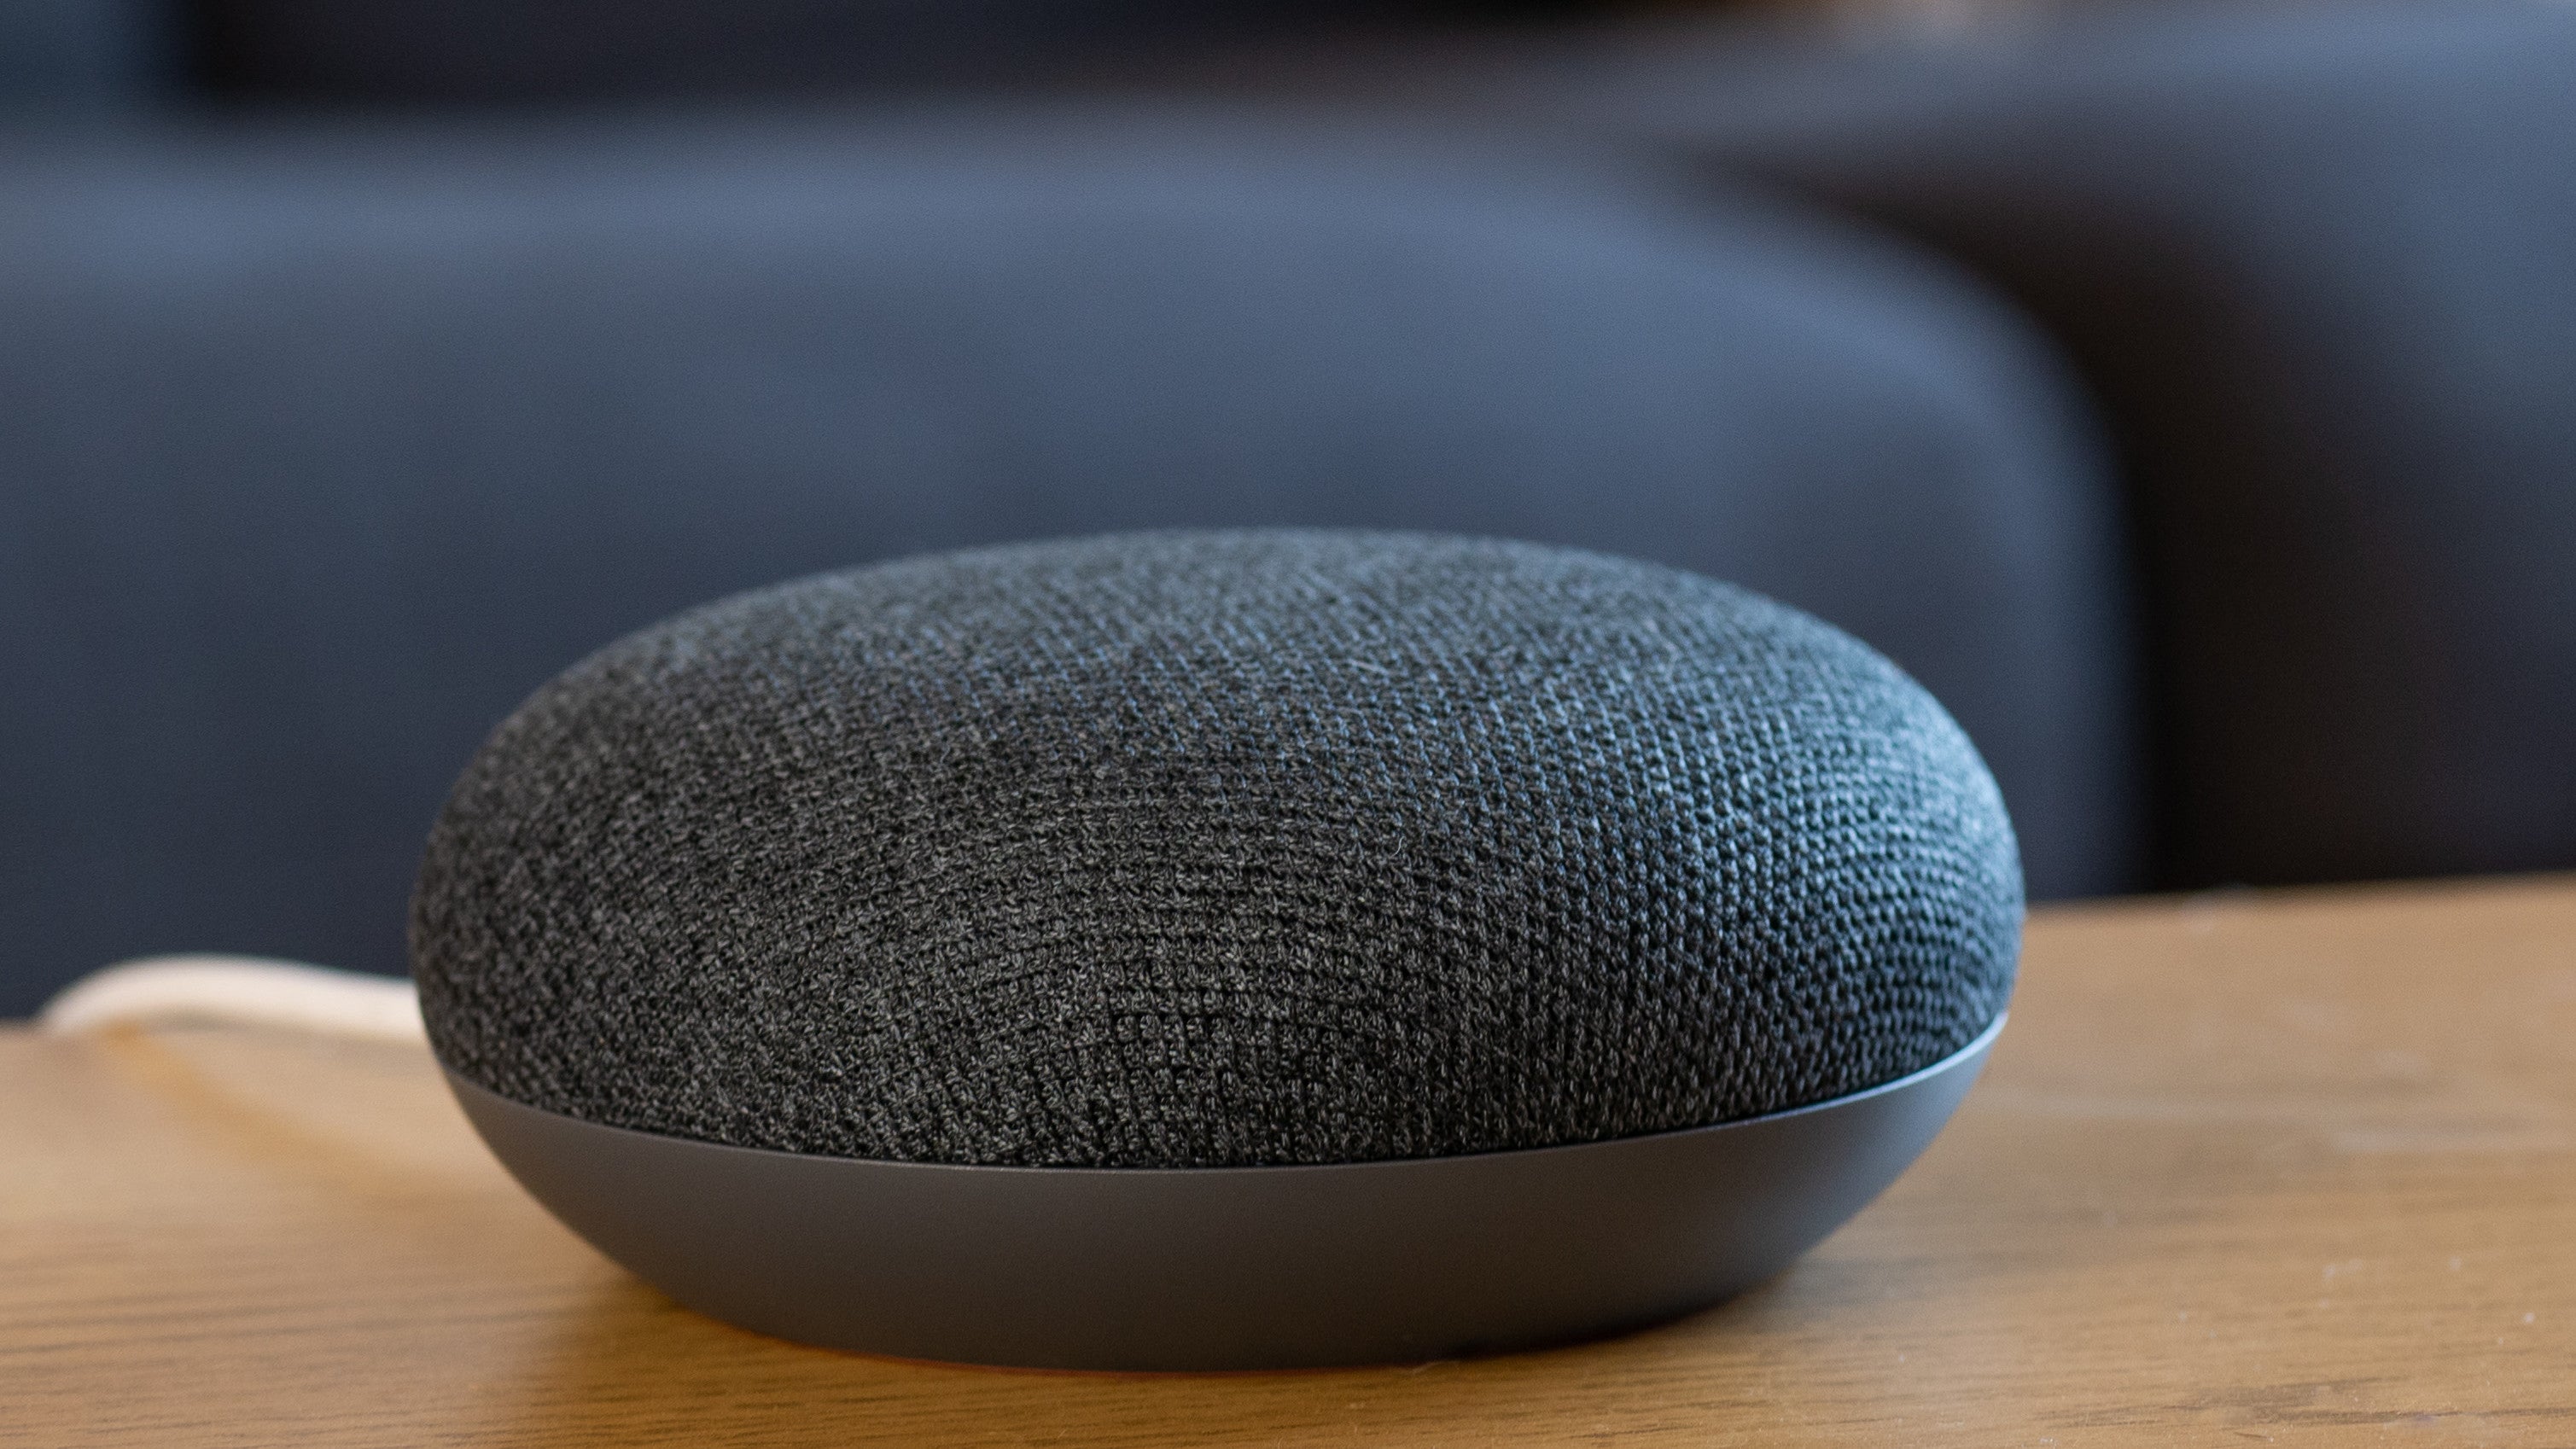 You Can Now ‘Stereo Pair’ Google Home And Google Home Mini Speakers